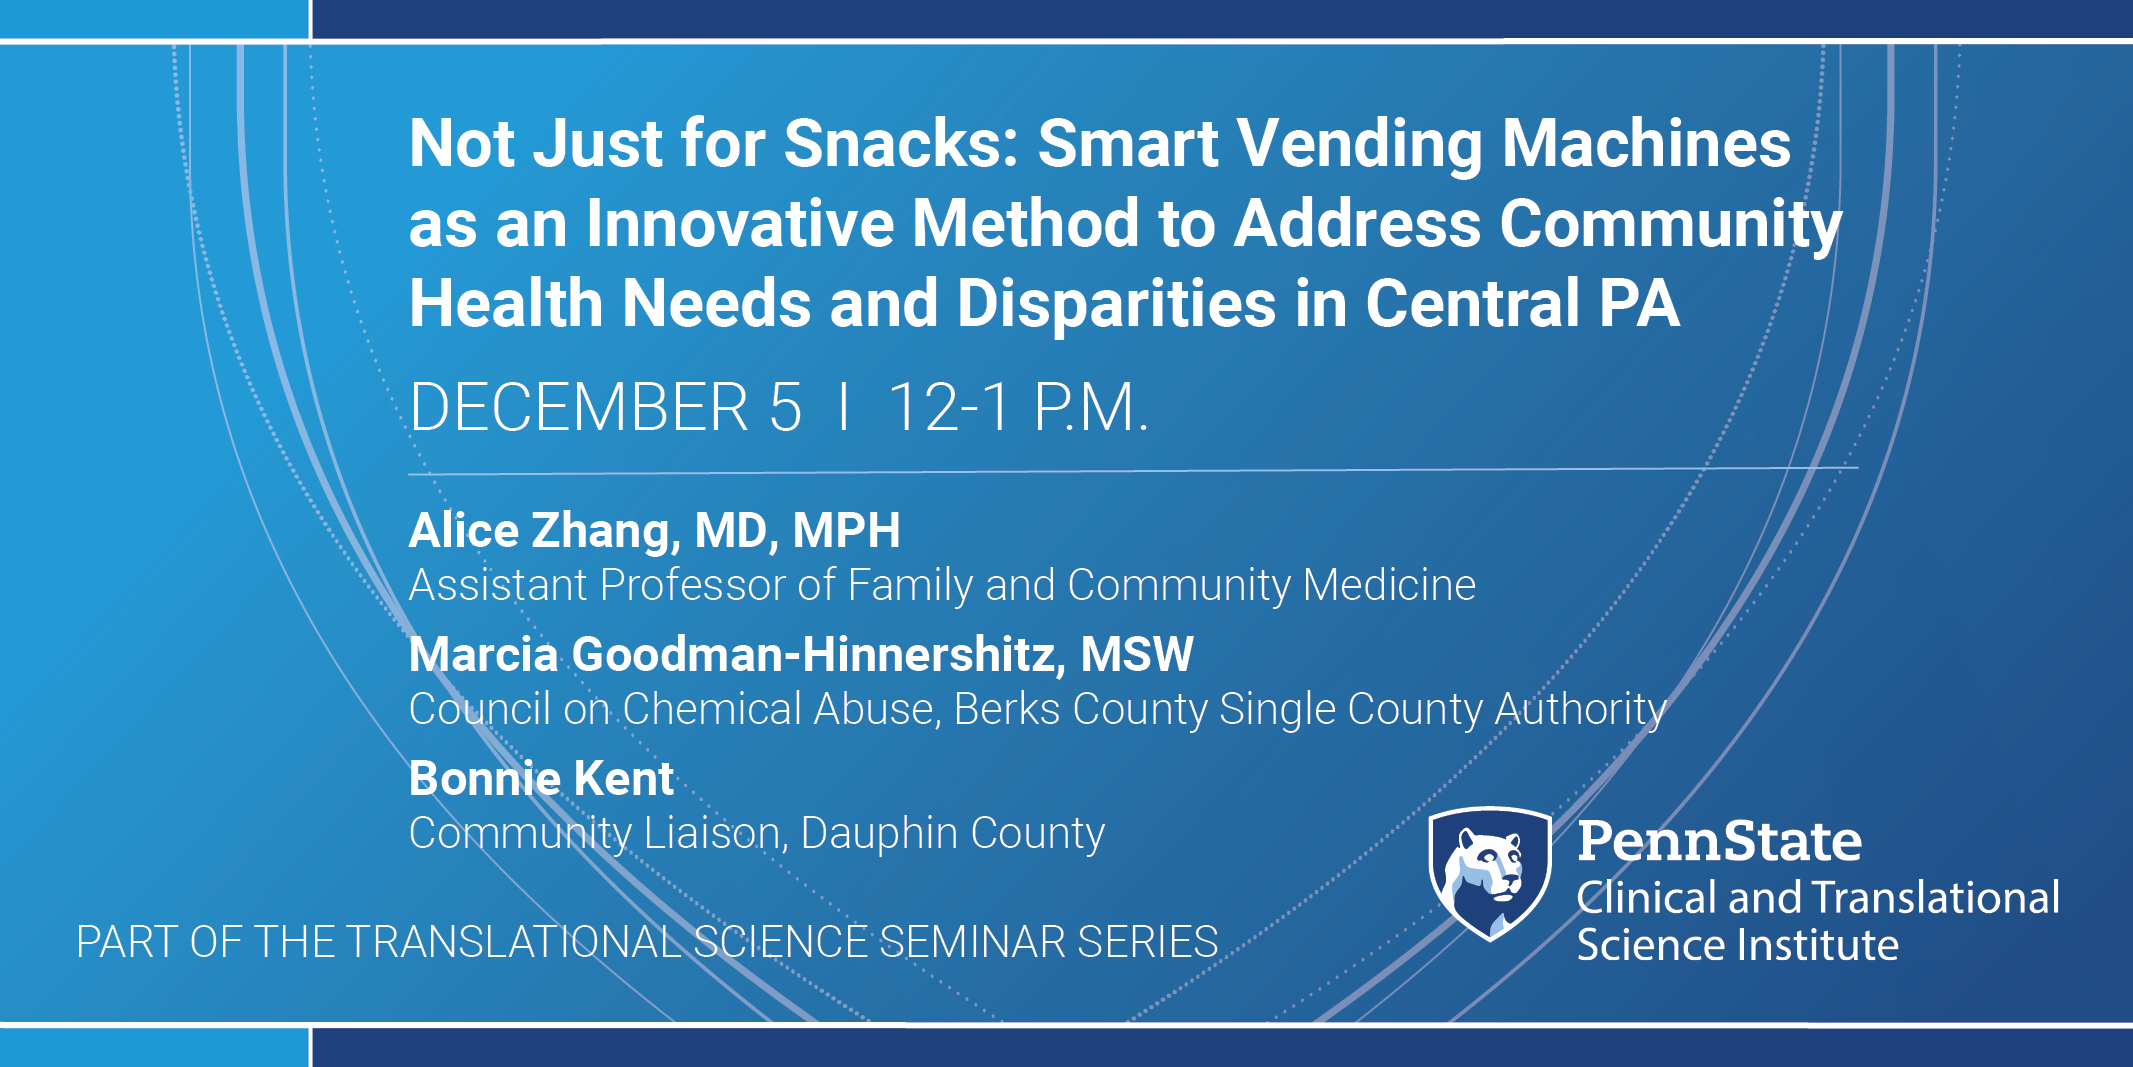 December TSS Seminar: Not just for snacks: smart vending machines as an innovative method to address community health needs and health disparities